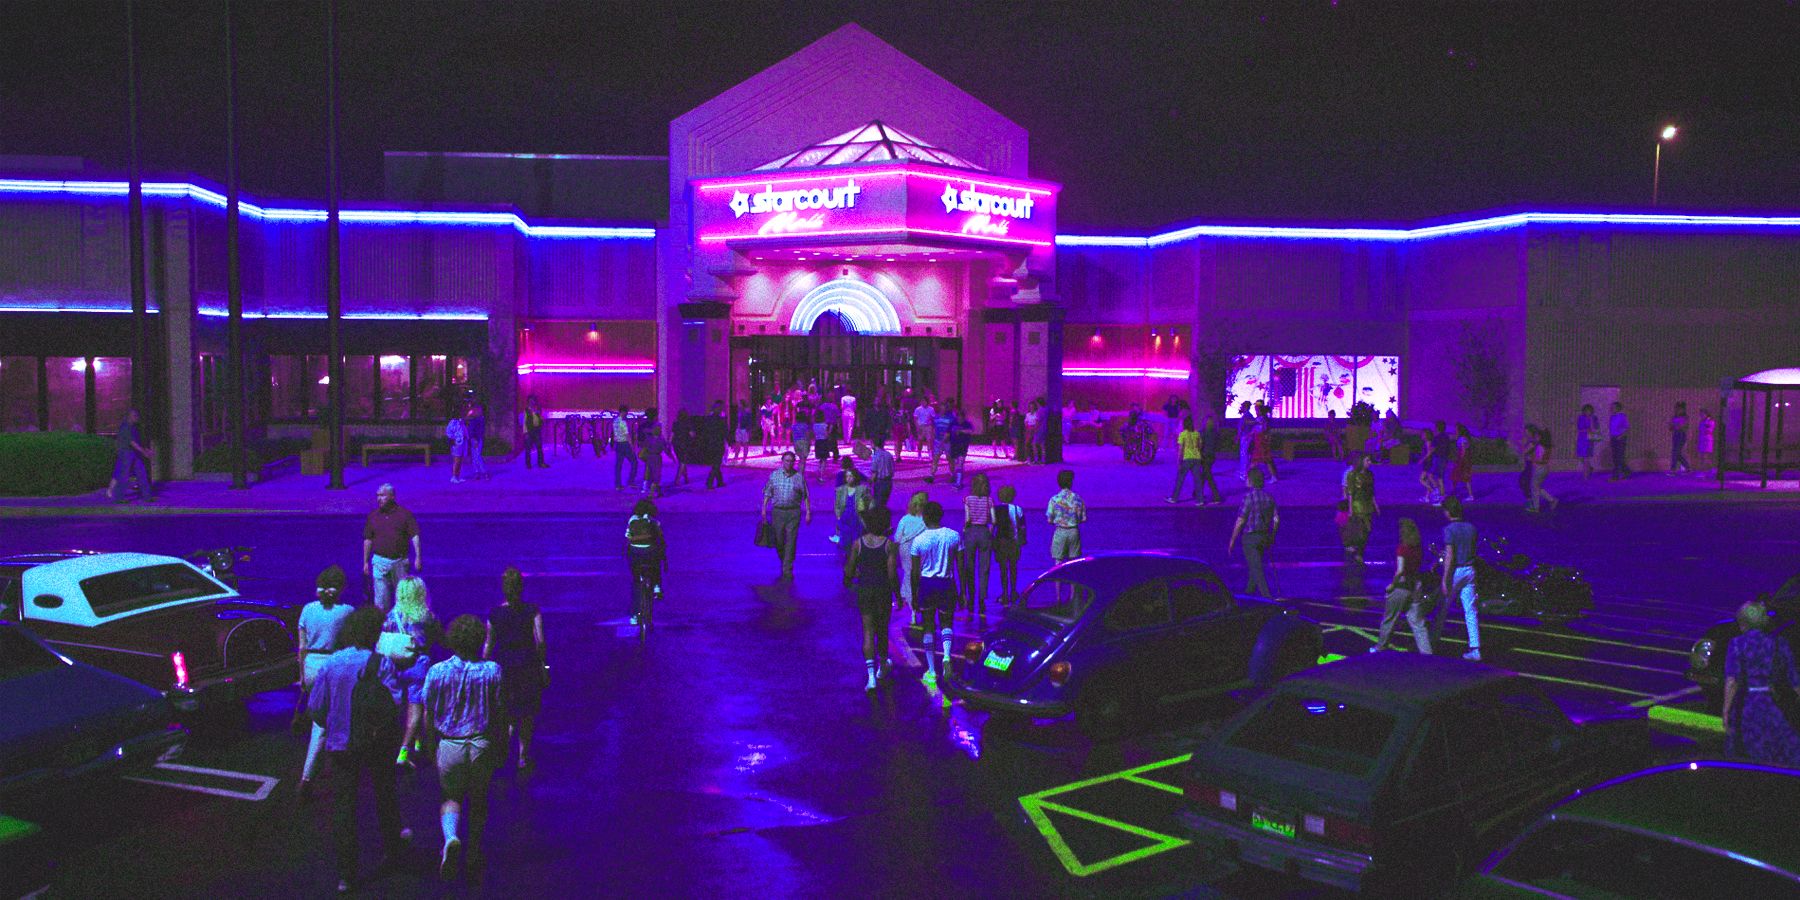 Stranger Things Starcourt Mall Actually Has A Dark And Gruesome